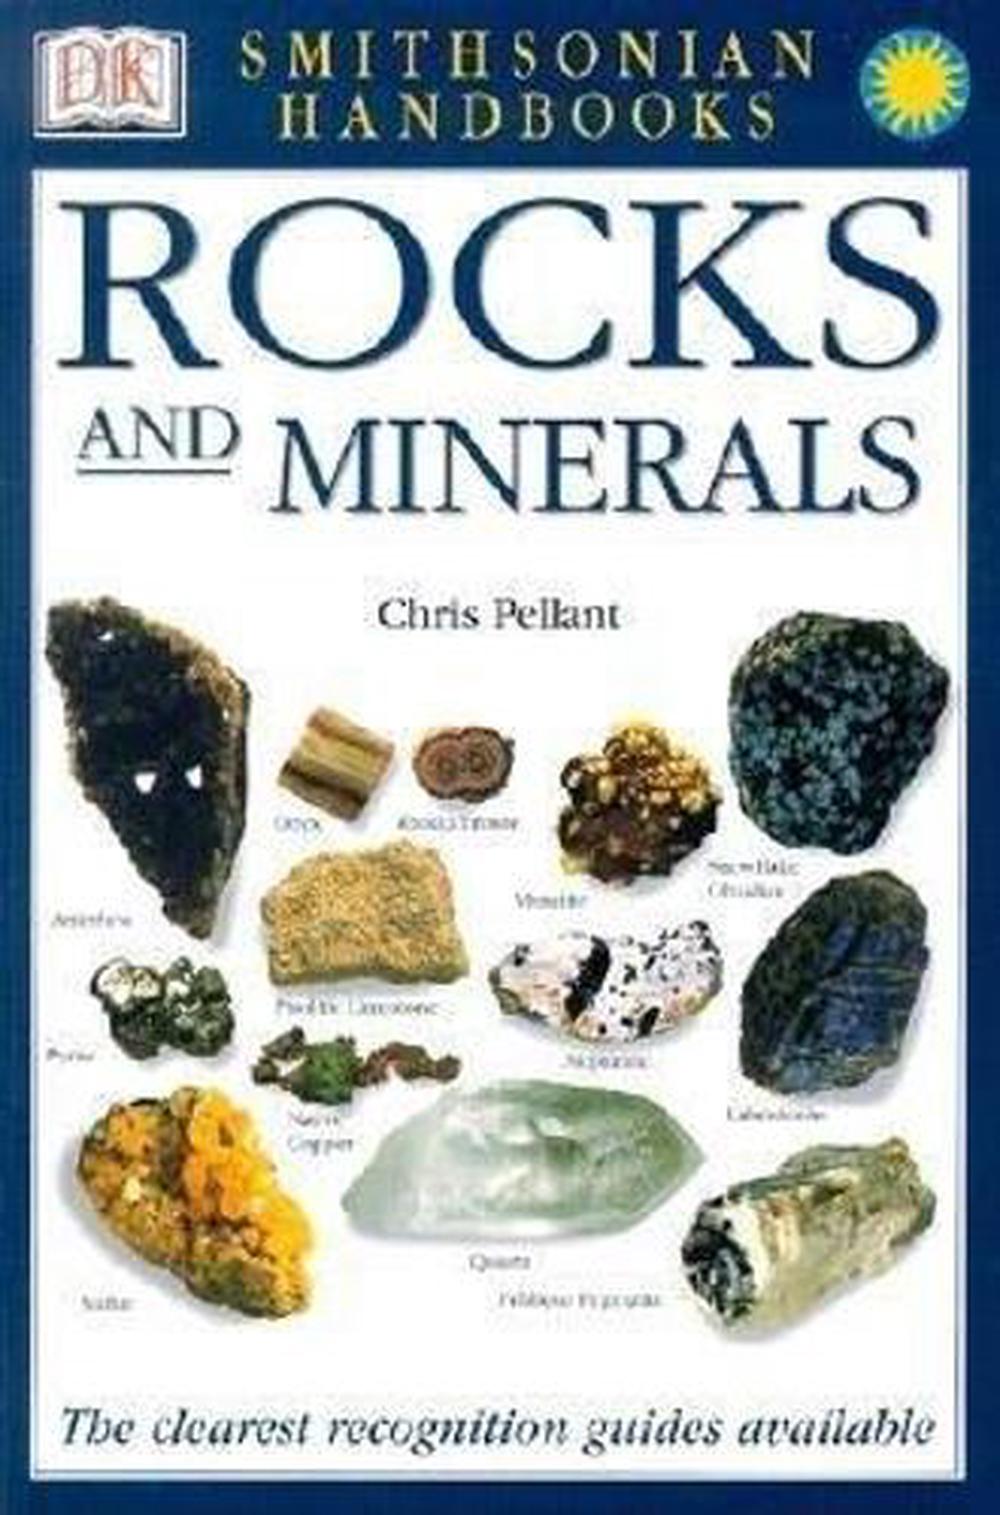 Rocks and Minerals: The Clearest Recognition Guide Available by Chris